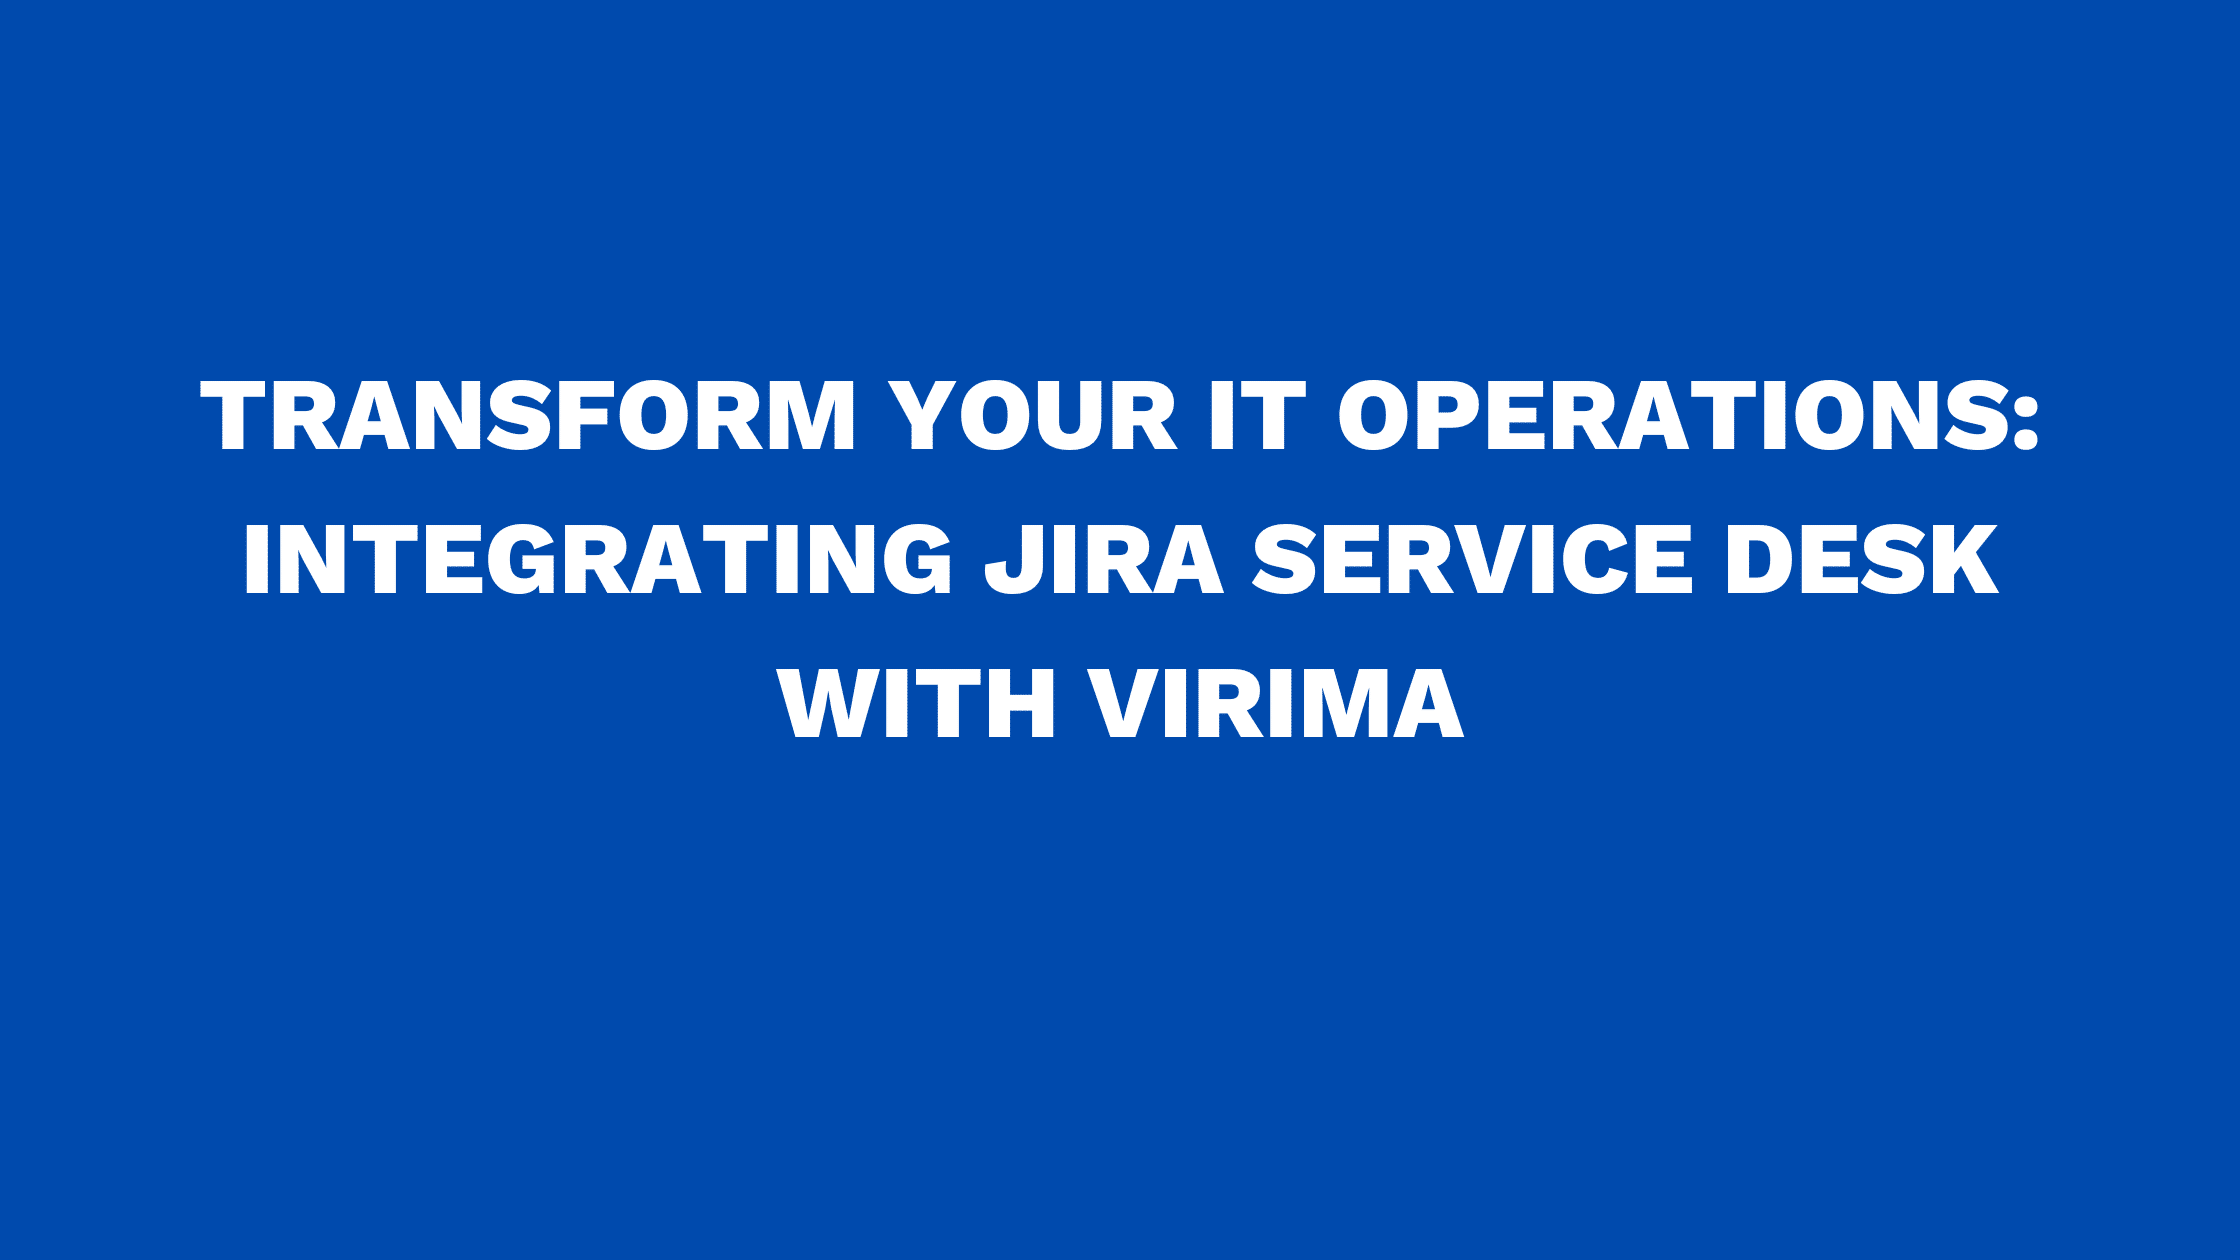 Transform your IT Operations: Integrating Jira Service Desk with Virima